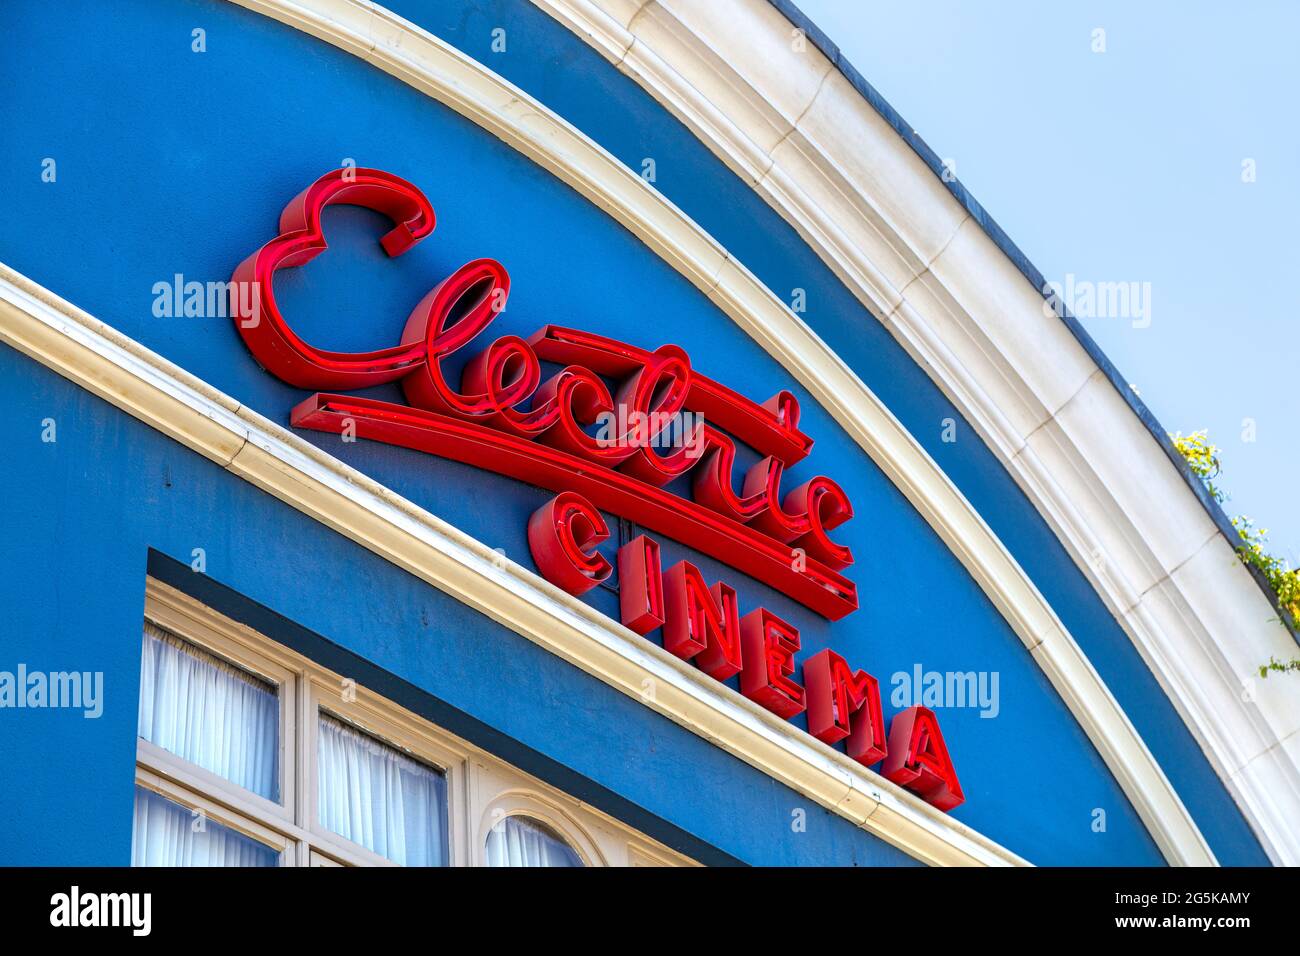 Sign on the facade of Electric Cinema on Portobello Road, Notting Hill, London, UK Stock Photo